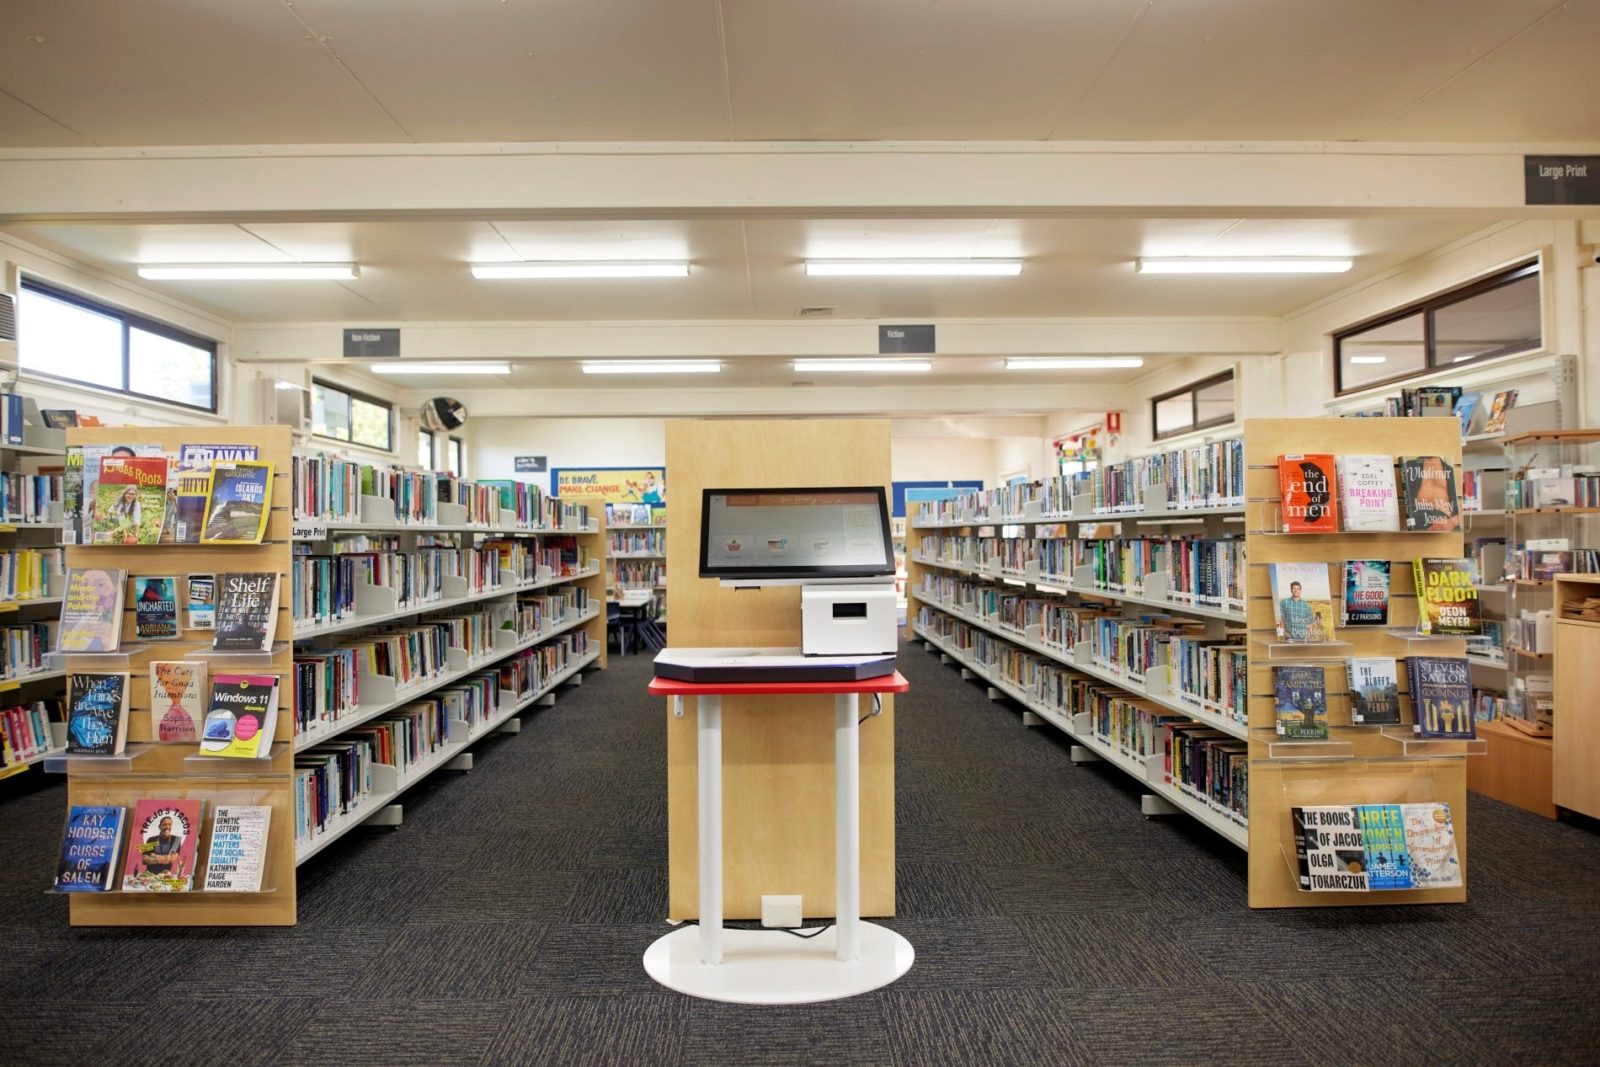 Interior of Helensburgh library with rows of bookshelves and a digital catalogue for searching